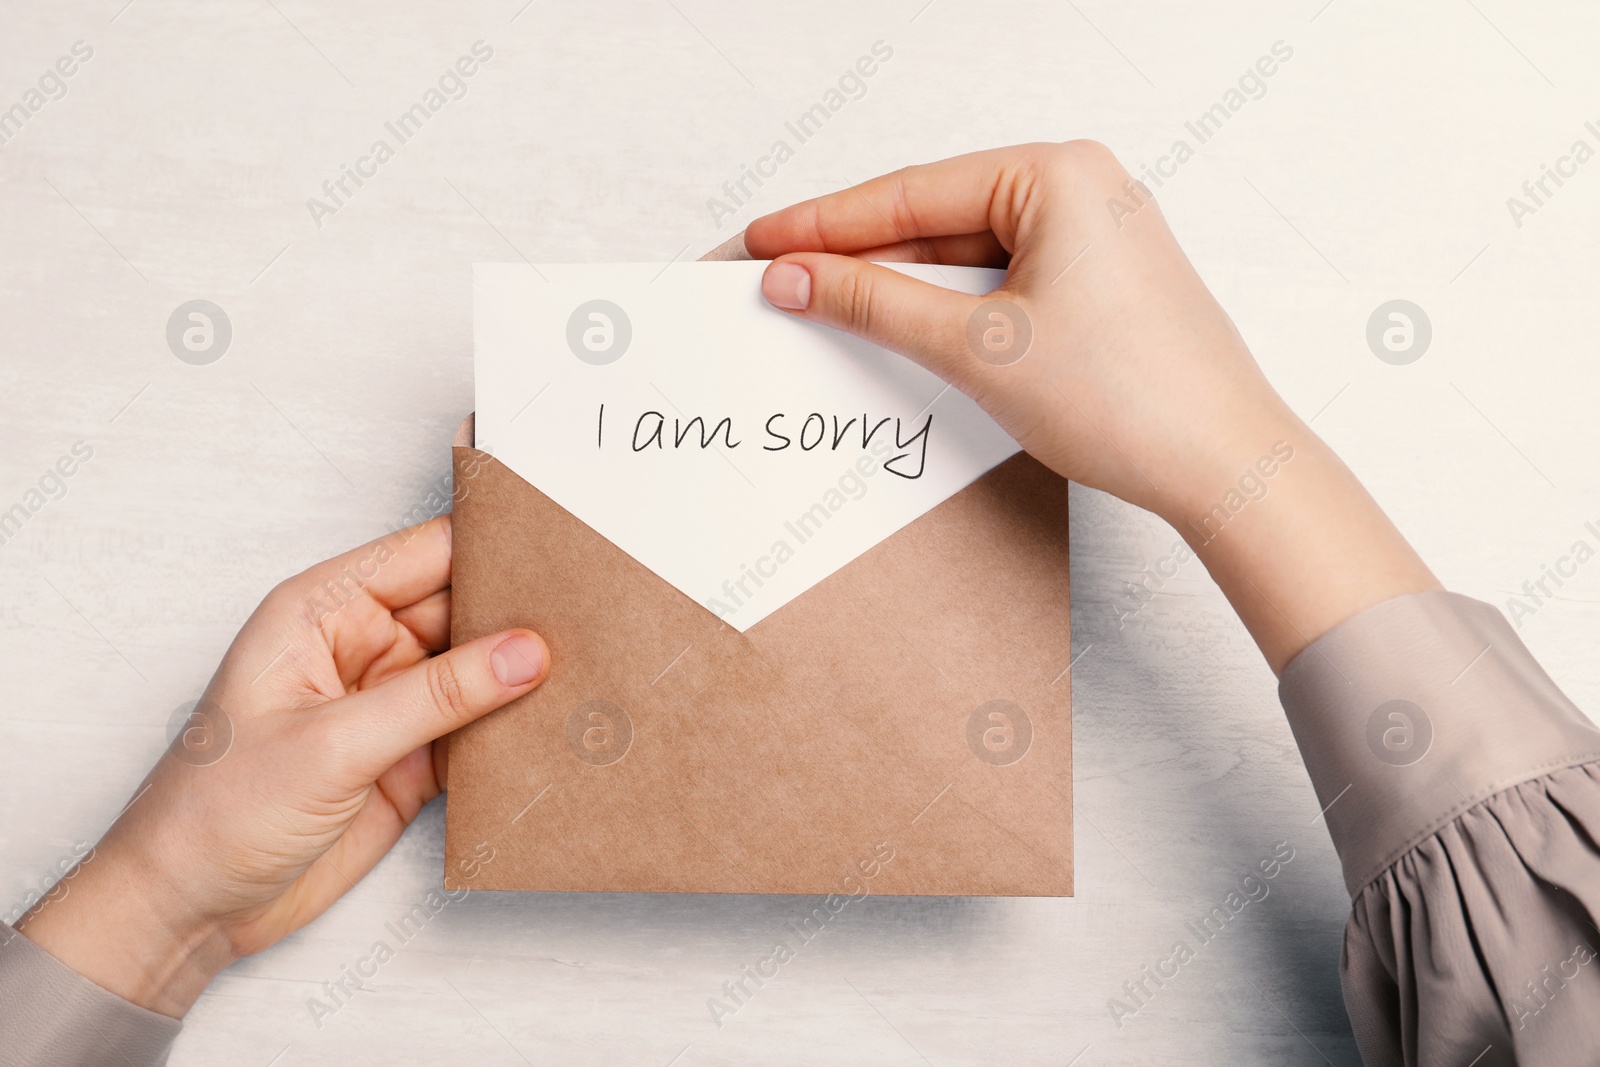 Image of Apology. Woman taking card with word Sorry out of envelope at light table, top view